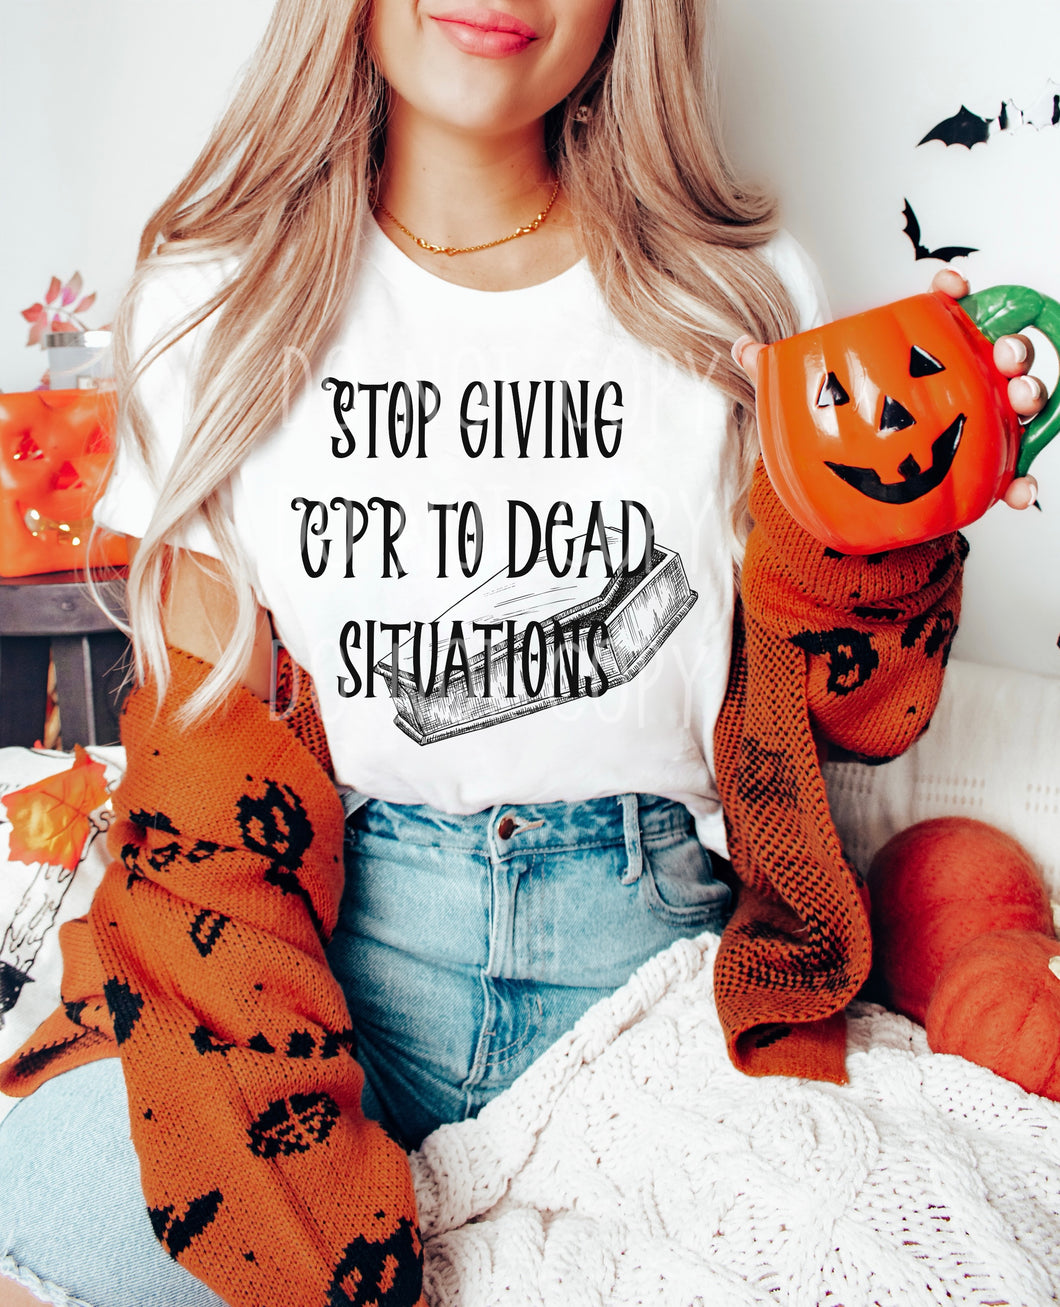 Stop giving CPR to dead situations